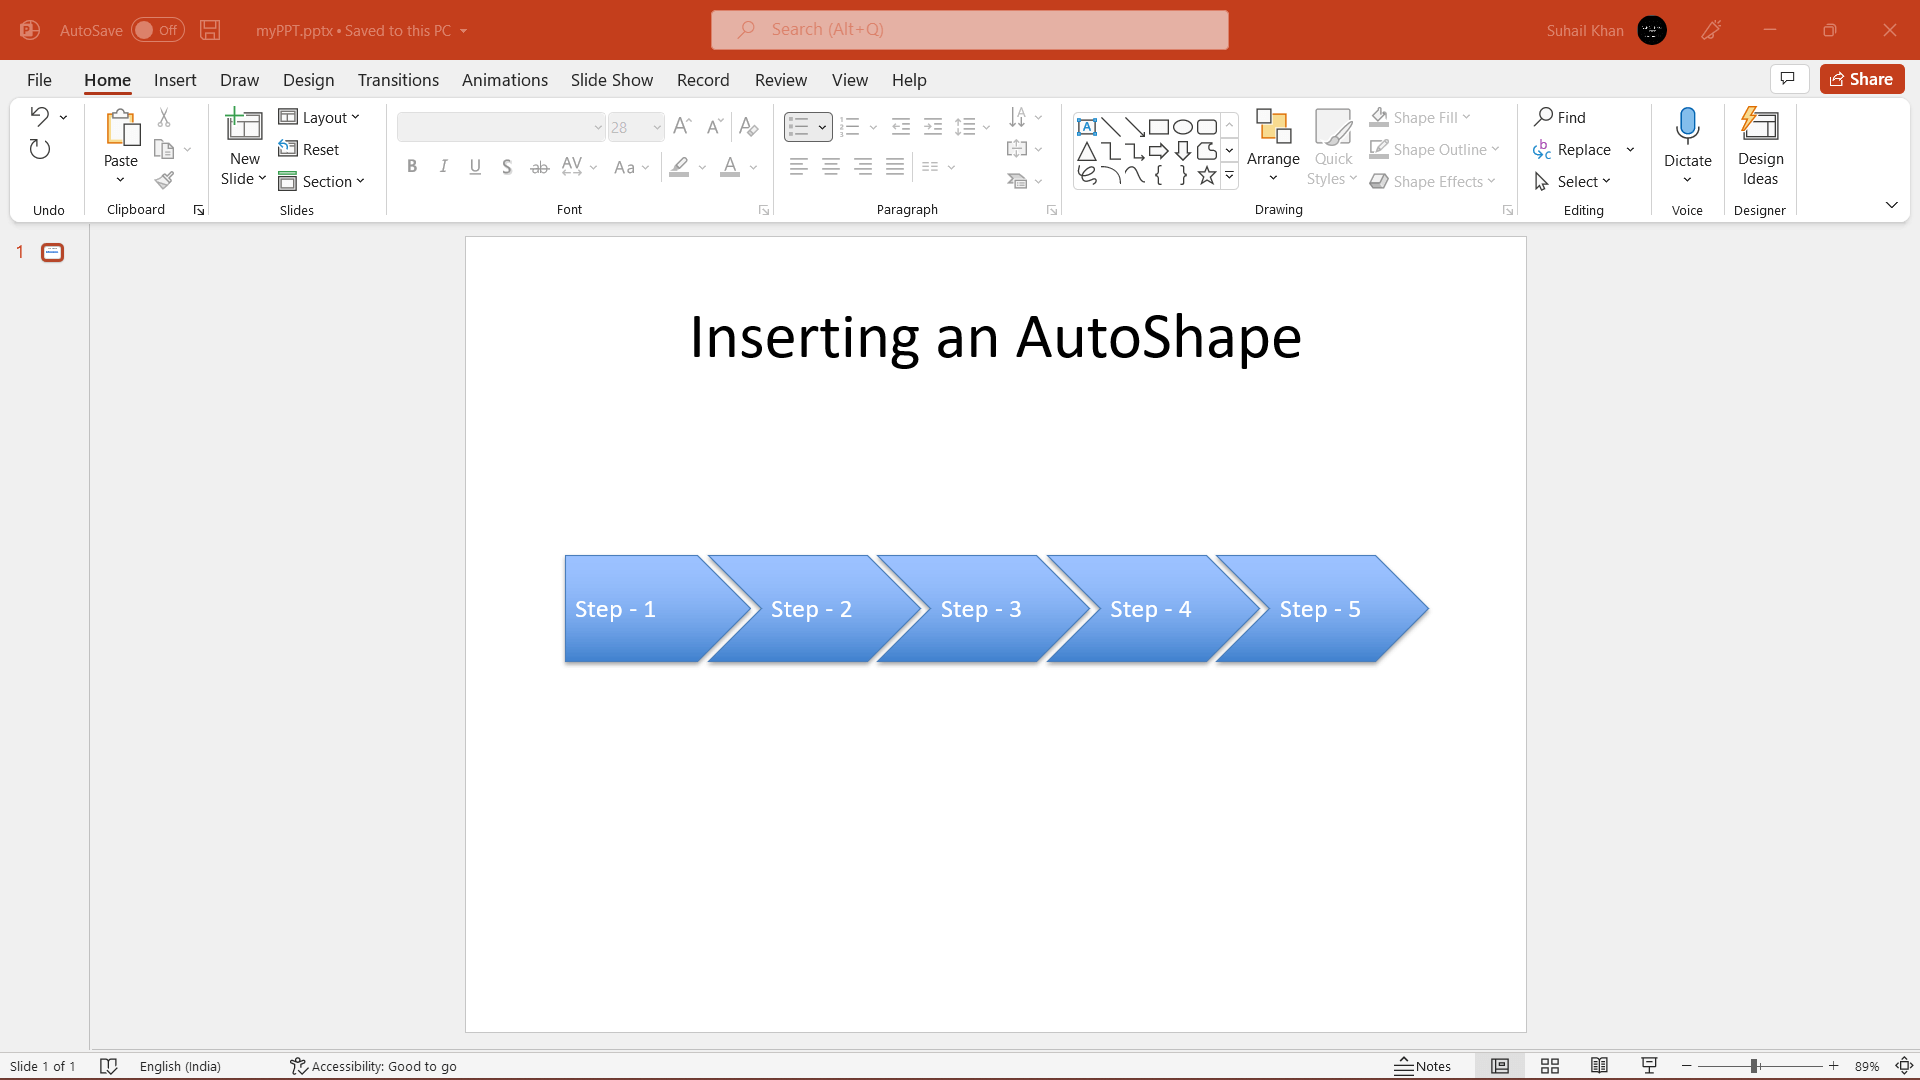 Creating and Updating PowerPoint Presentation using Python